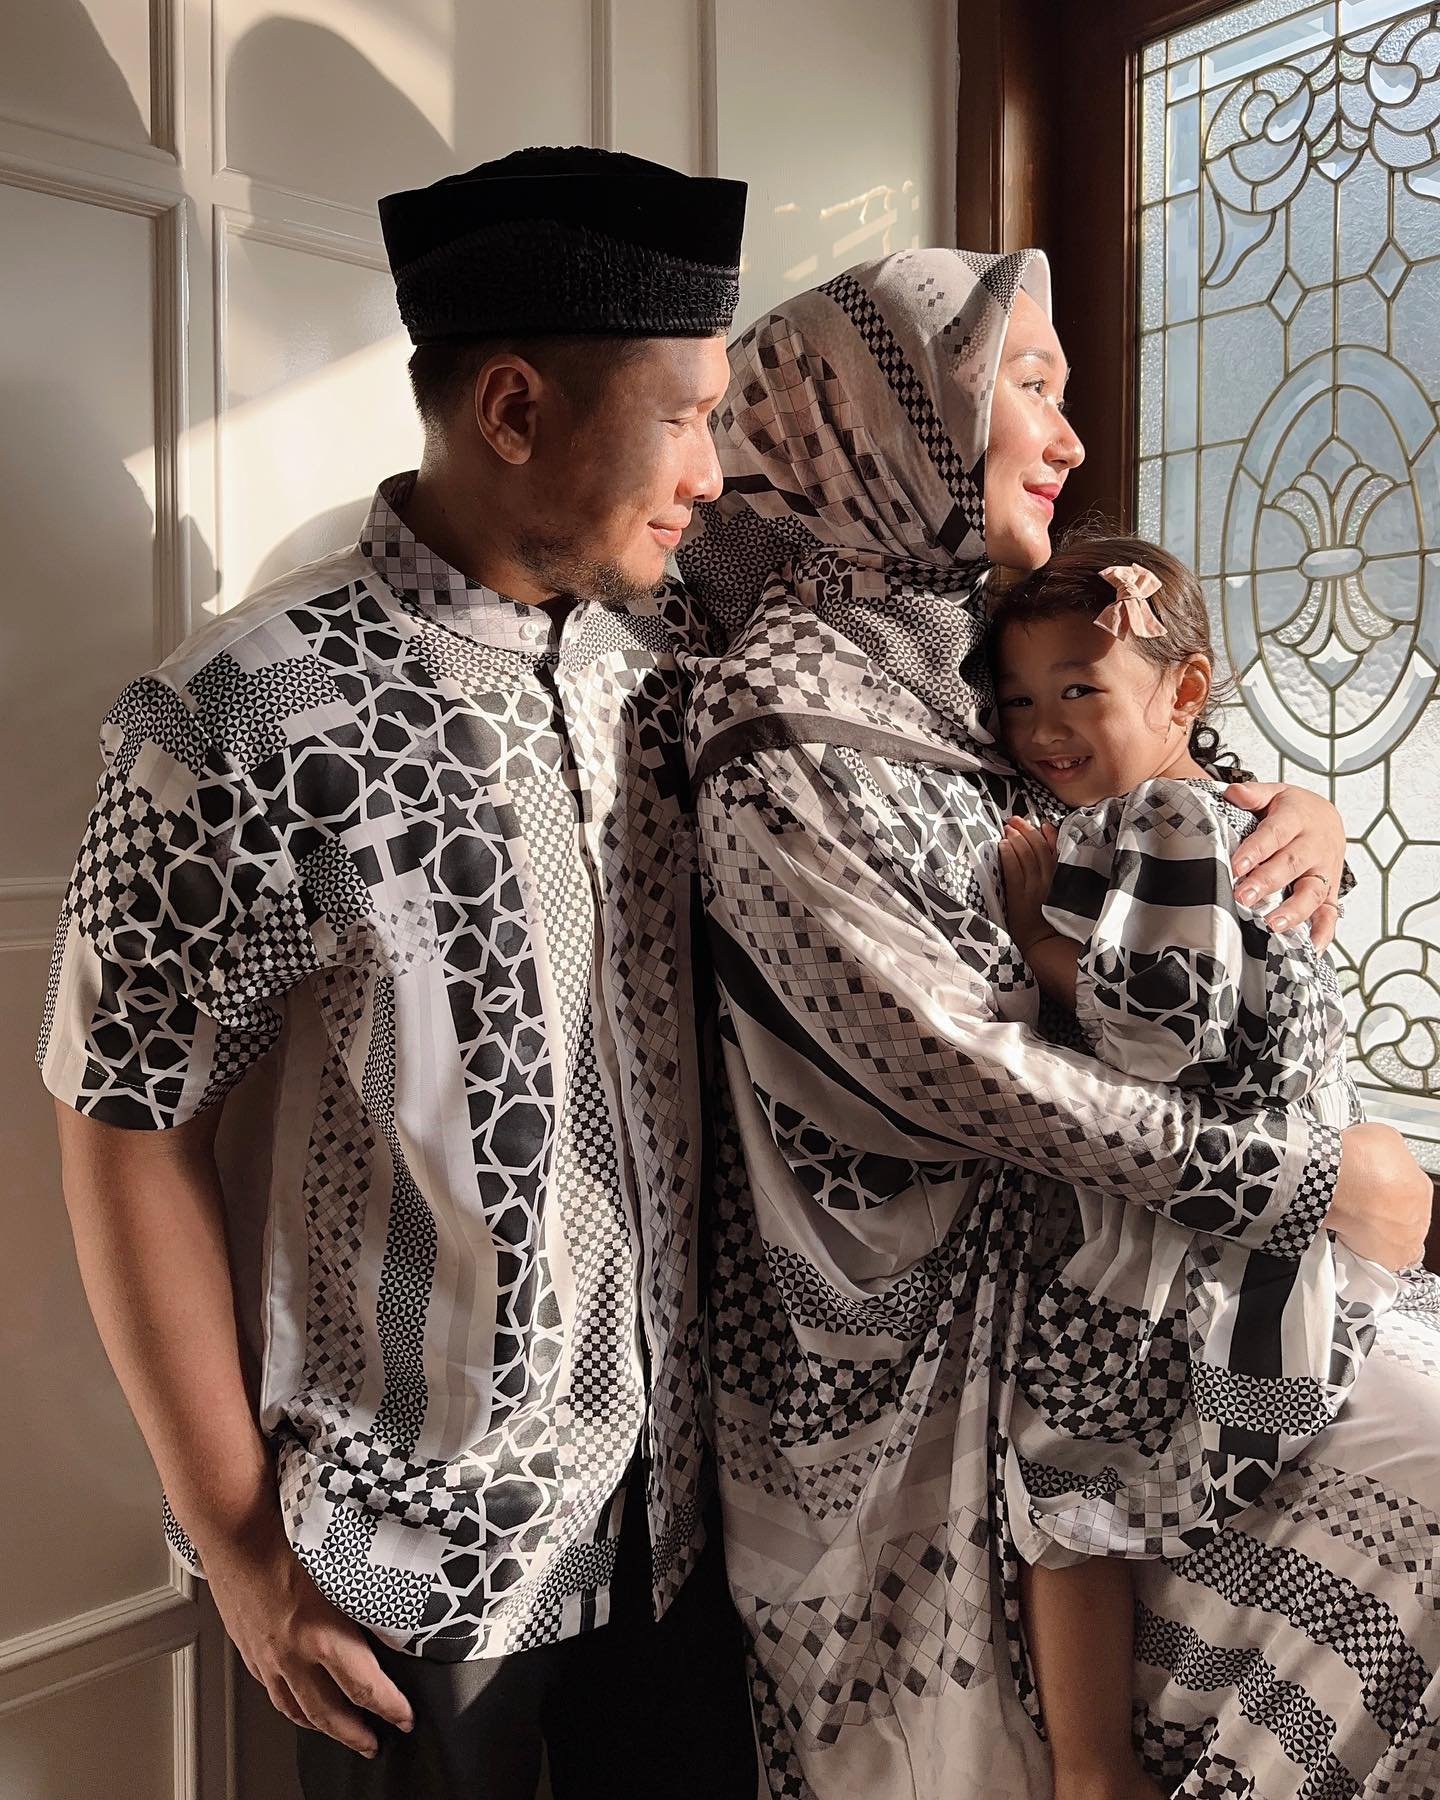 @dianpelangi 's family of three matching in black and white printed designs